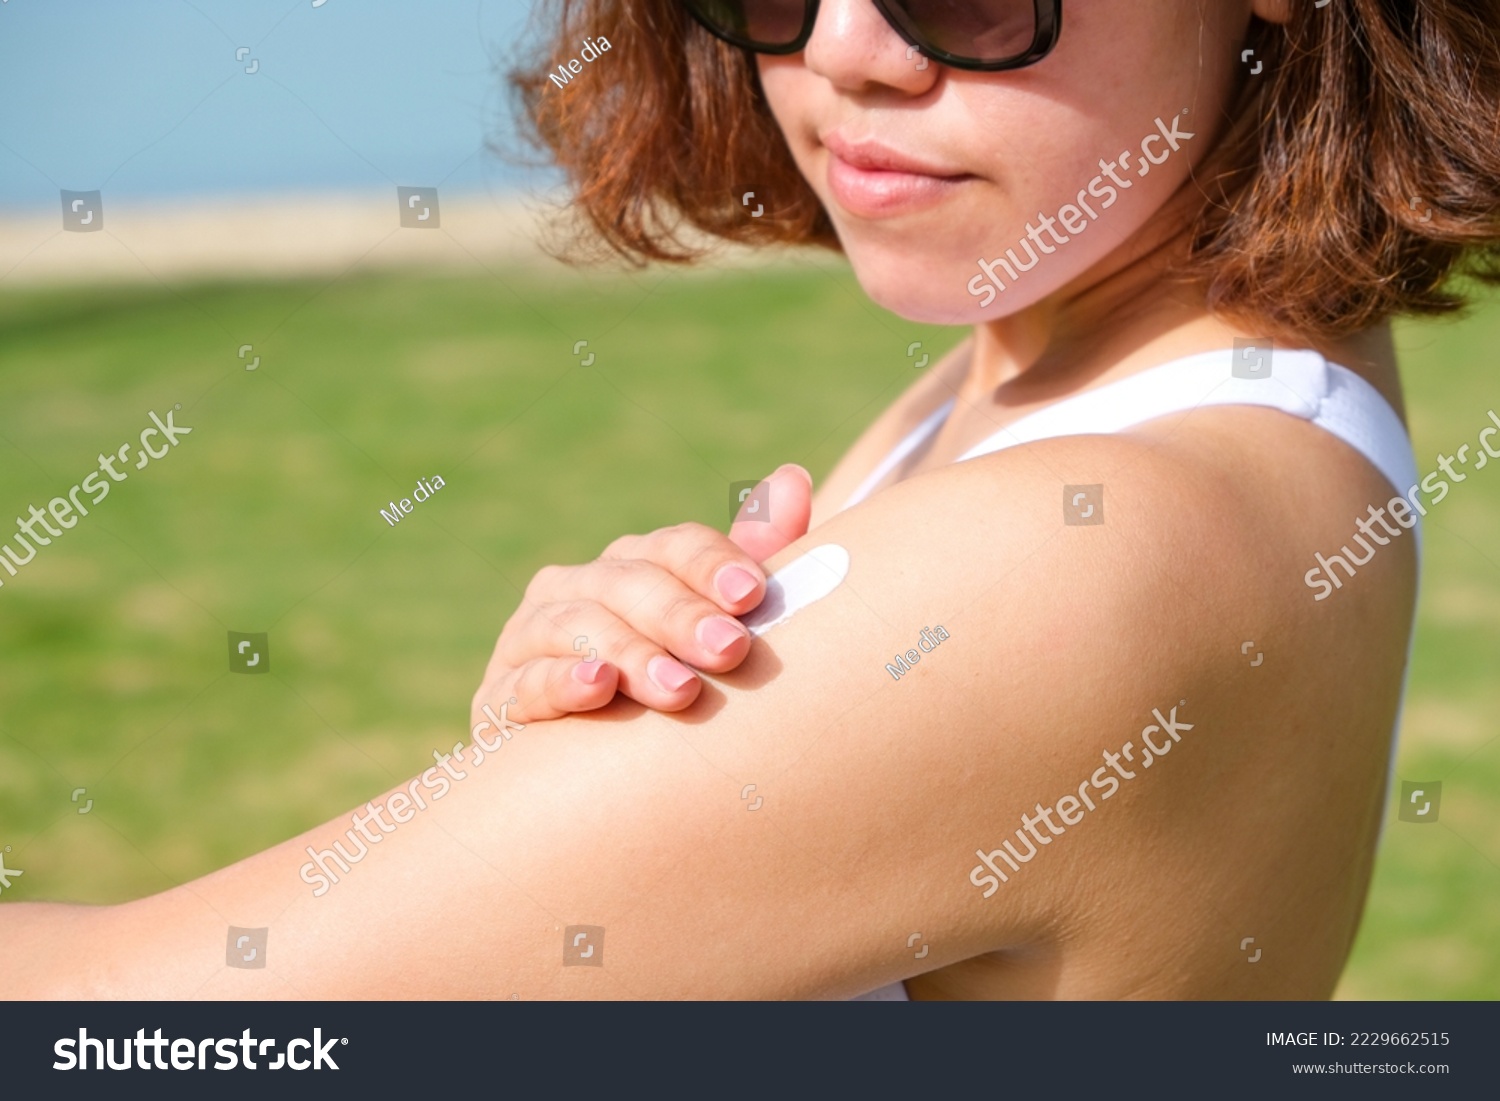 A woman is applying sunscreen and skin care to protect her skin from UV rays. She was applying sunscreen to her shoulders and arms. sunny background Health and skin care concept #2229662515